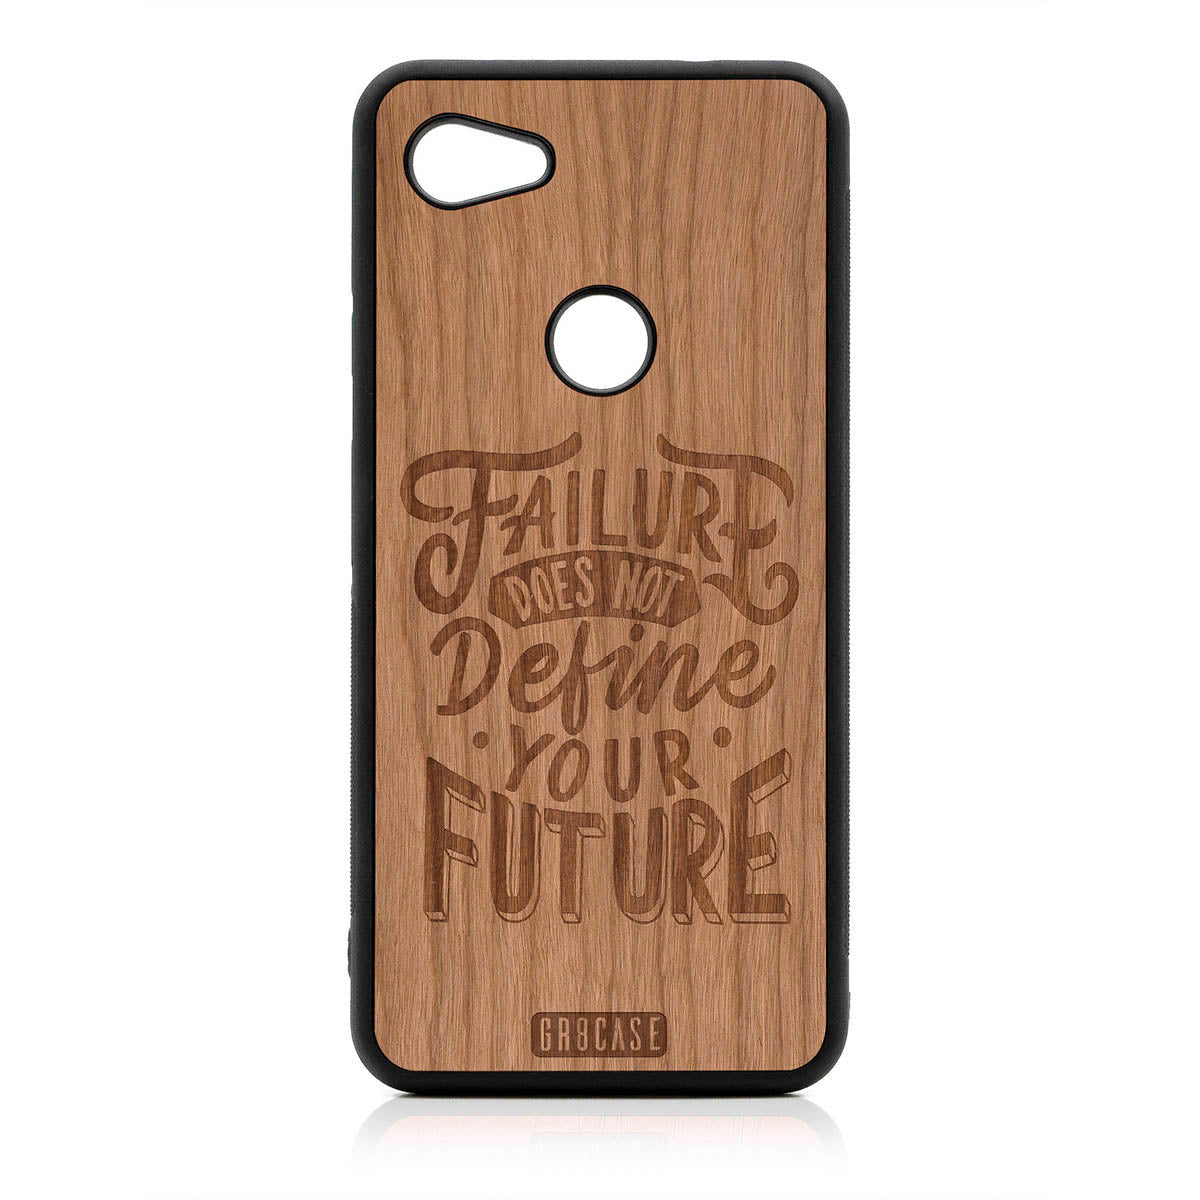 Failure Does Not Define You Future Design Wood Case For Google Pixel 3A by GR8CASE